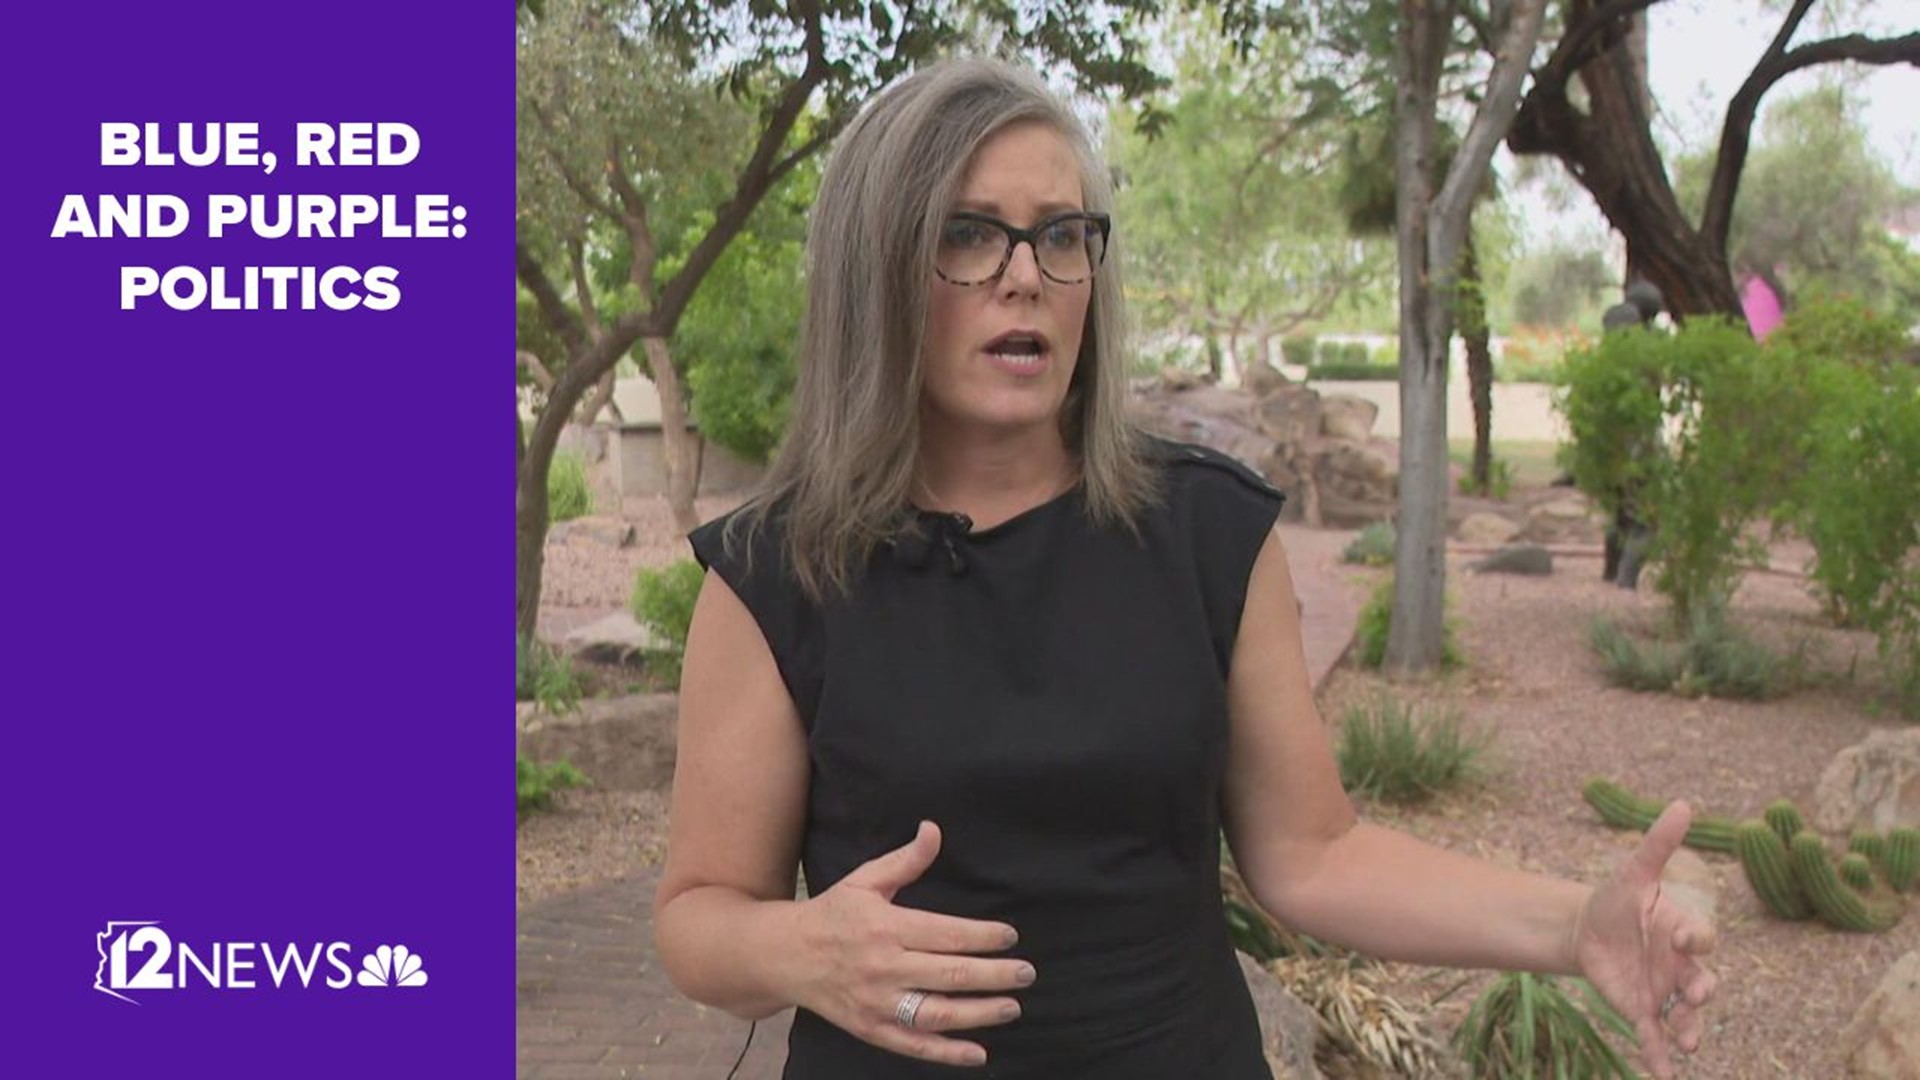 Gubernatorial candidate Katie Hobbs has been criticized for her involvement in a discrimination lawsuit filed by an Arizona Senate staffer.